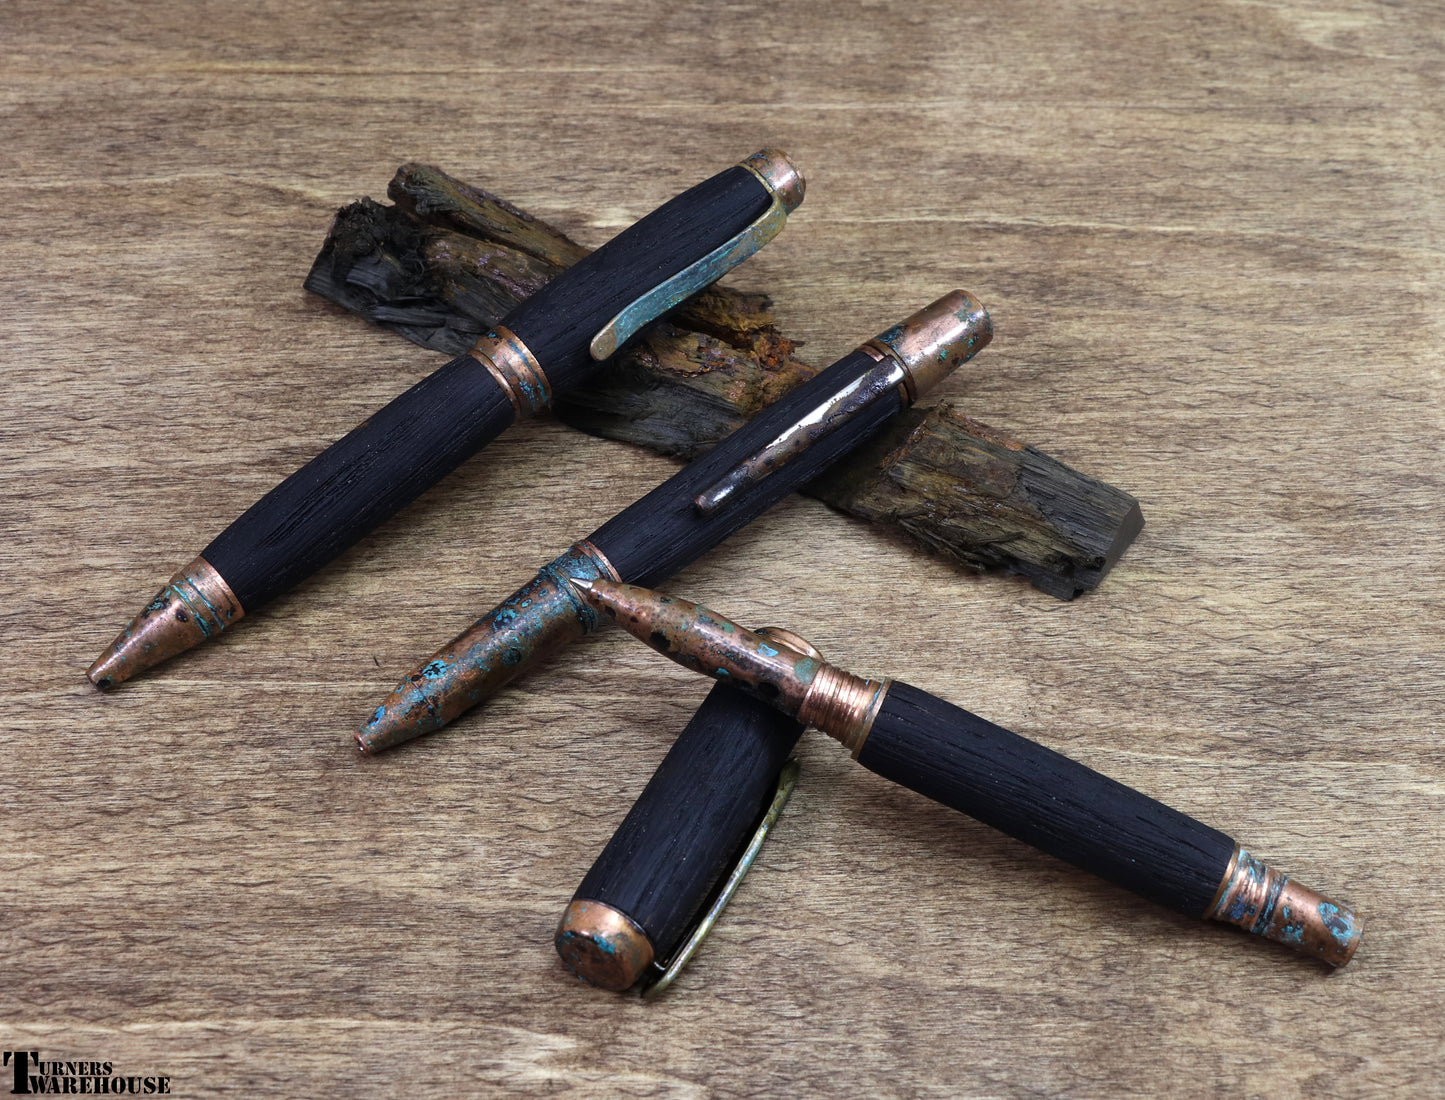  Element Series Pen Kits all Copper with Patina